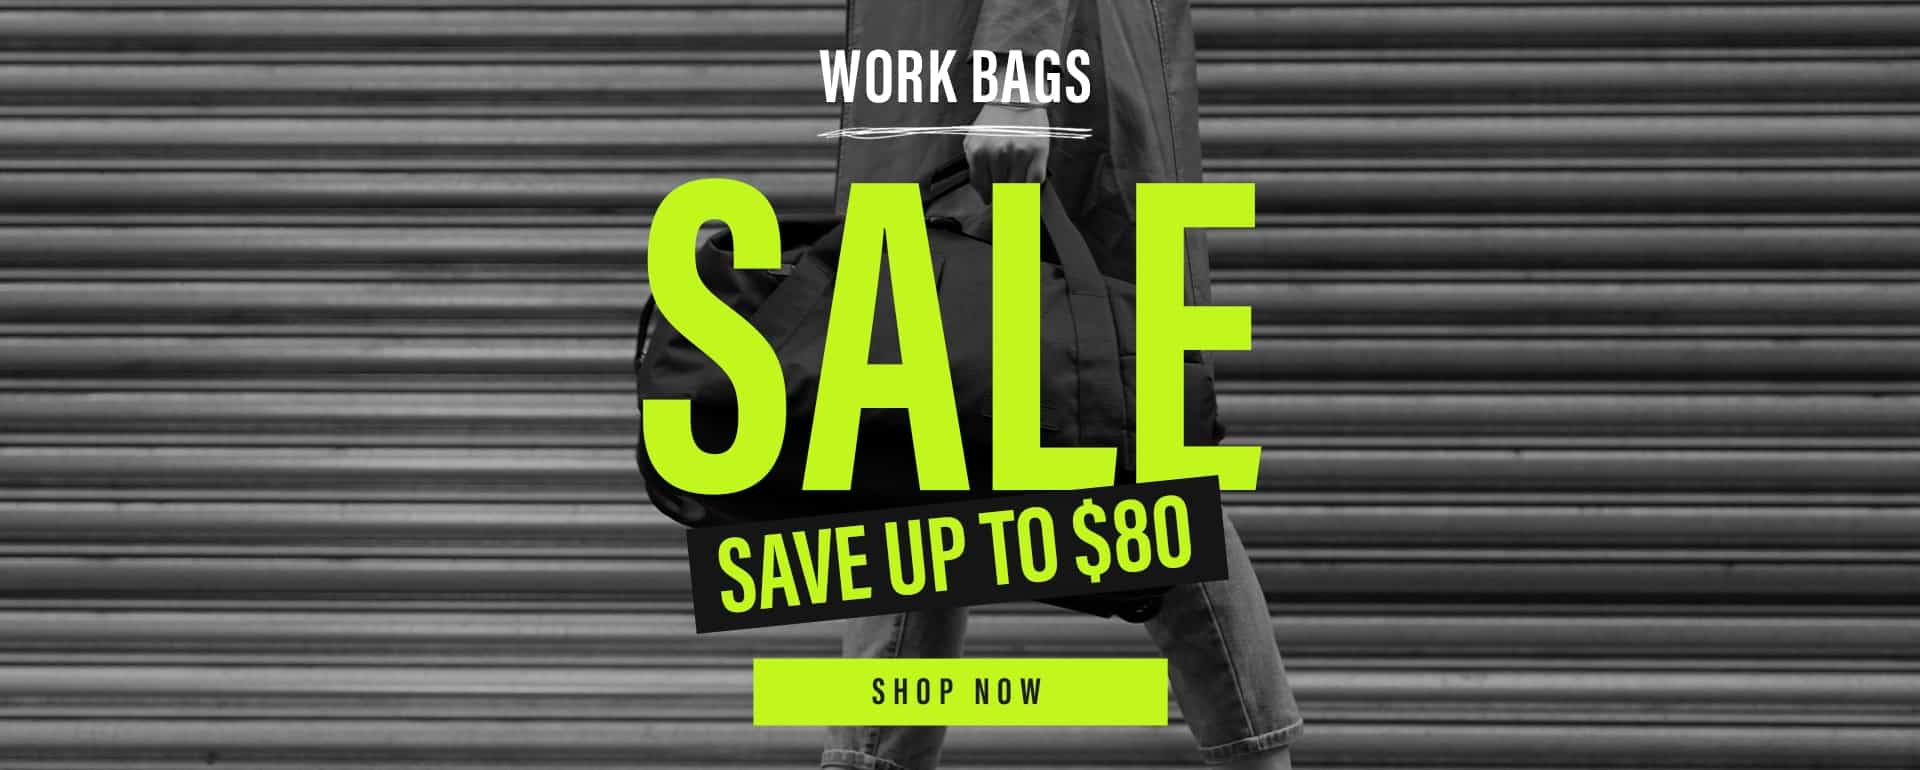 Save 30% OFF(Up to $80) on Work bags